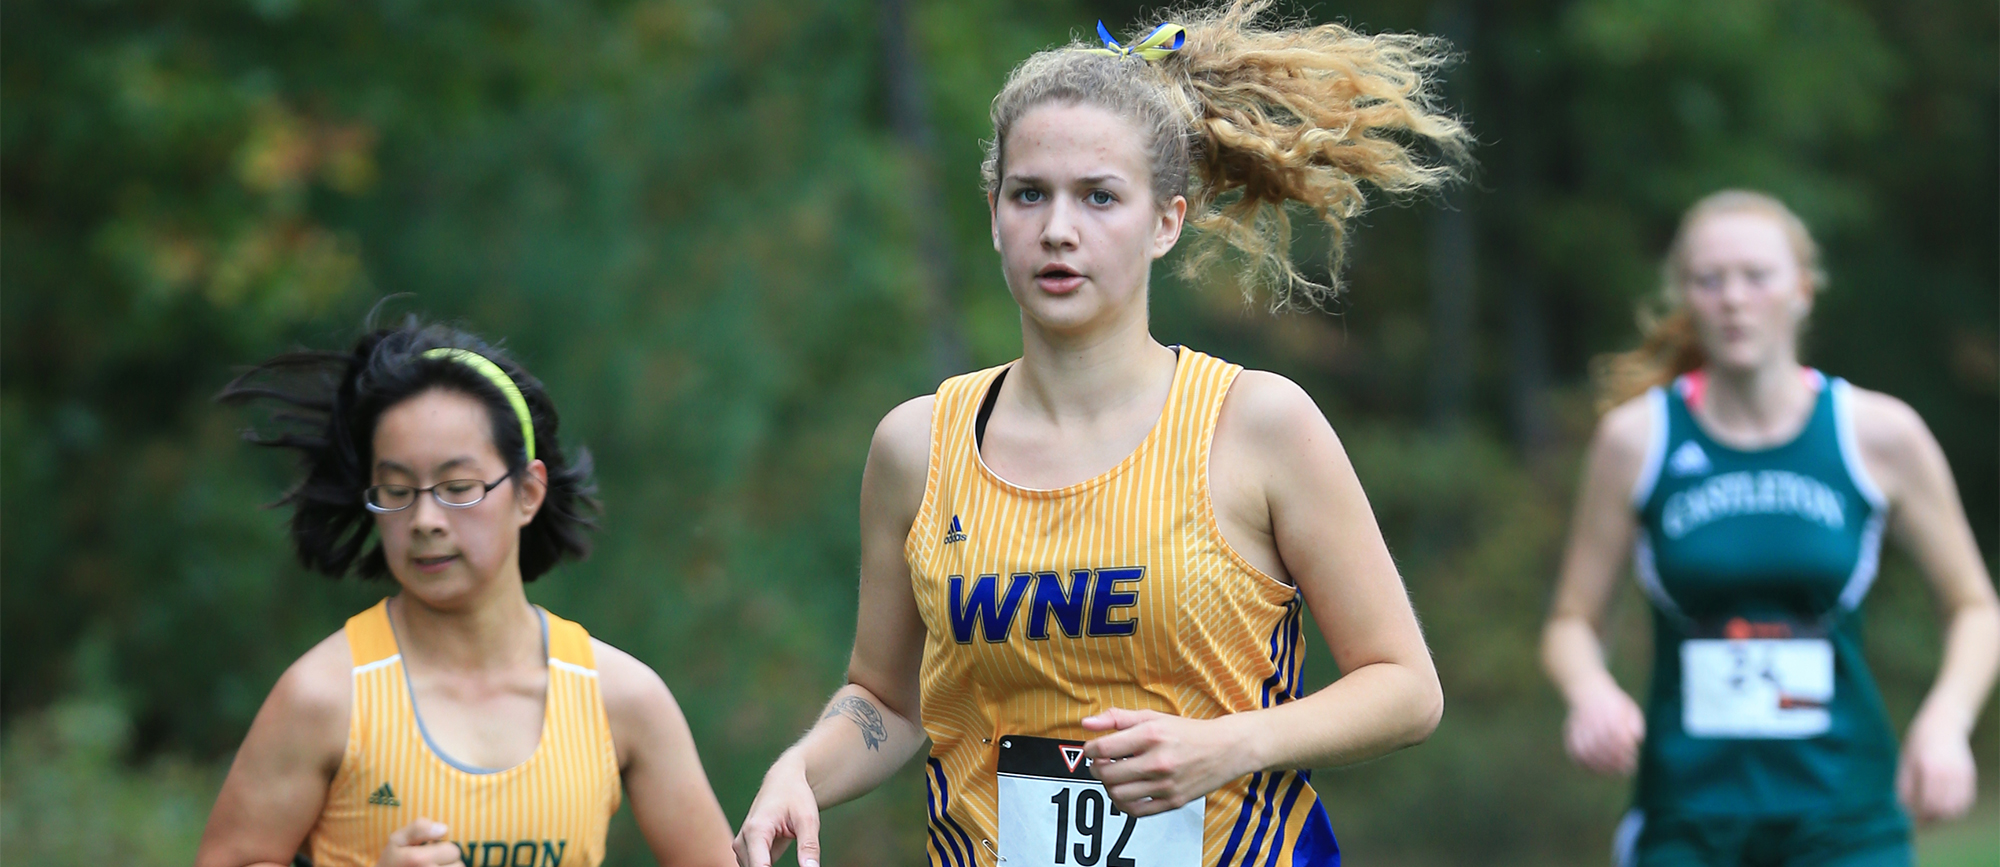 Ashley Benedict finished 16th overall as Western New England captured the Elms Blazer Classic on Saturday. (Photo by Doug Steinbock)